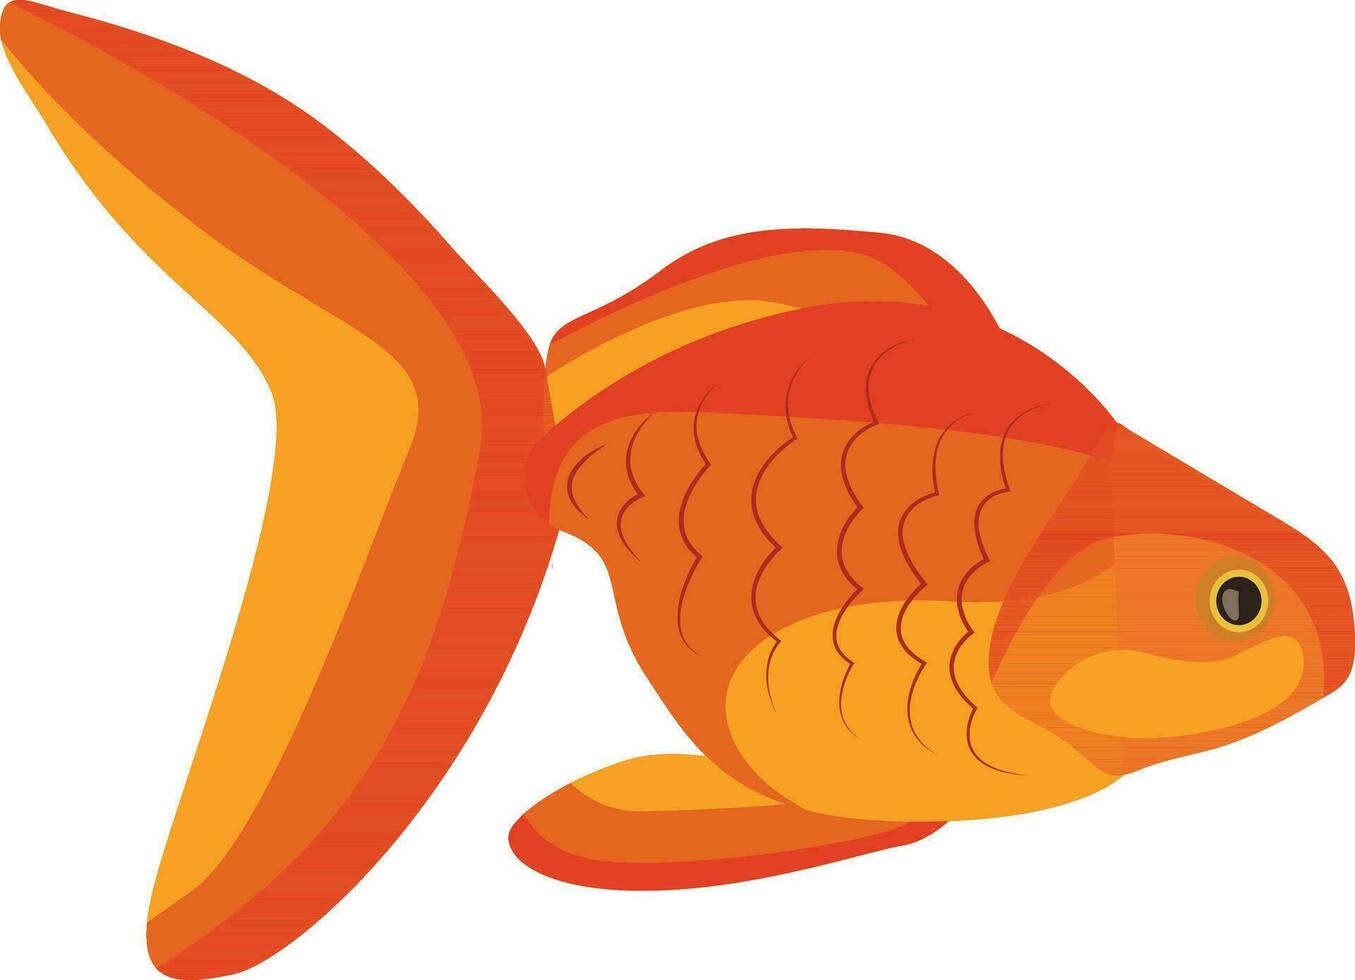 color fish illustration, silhouette of a goldfish from an aquarium